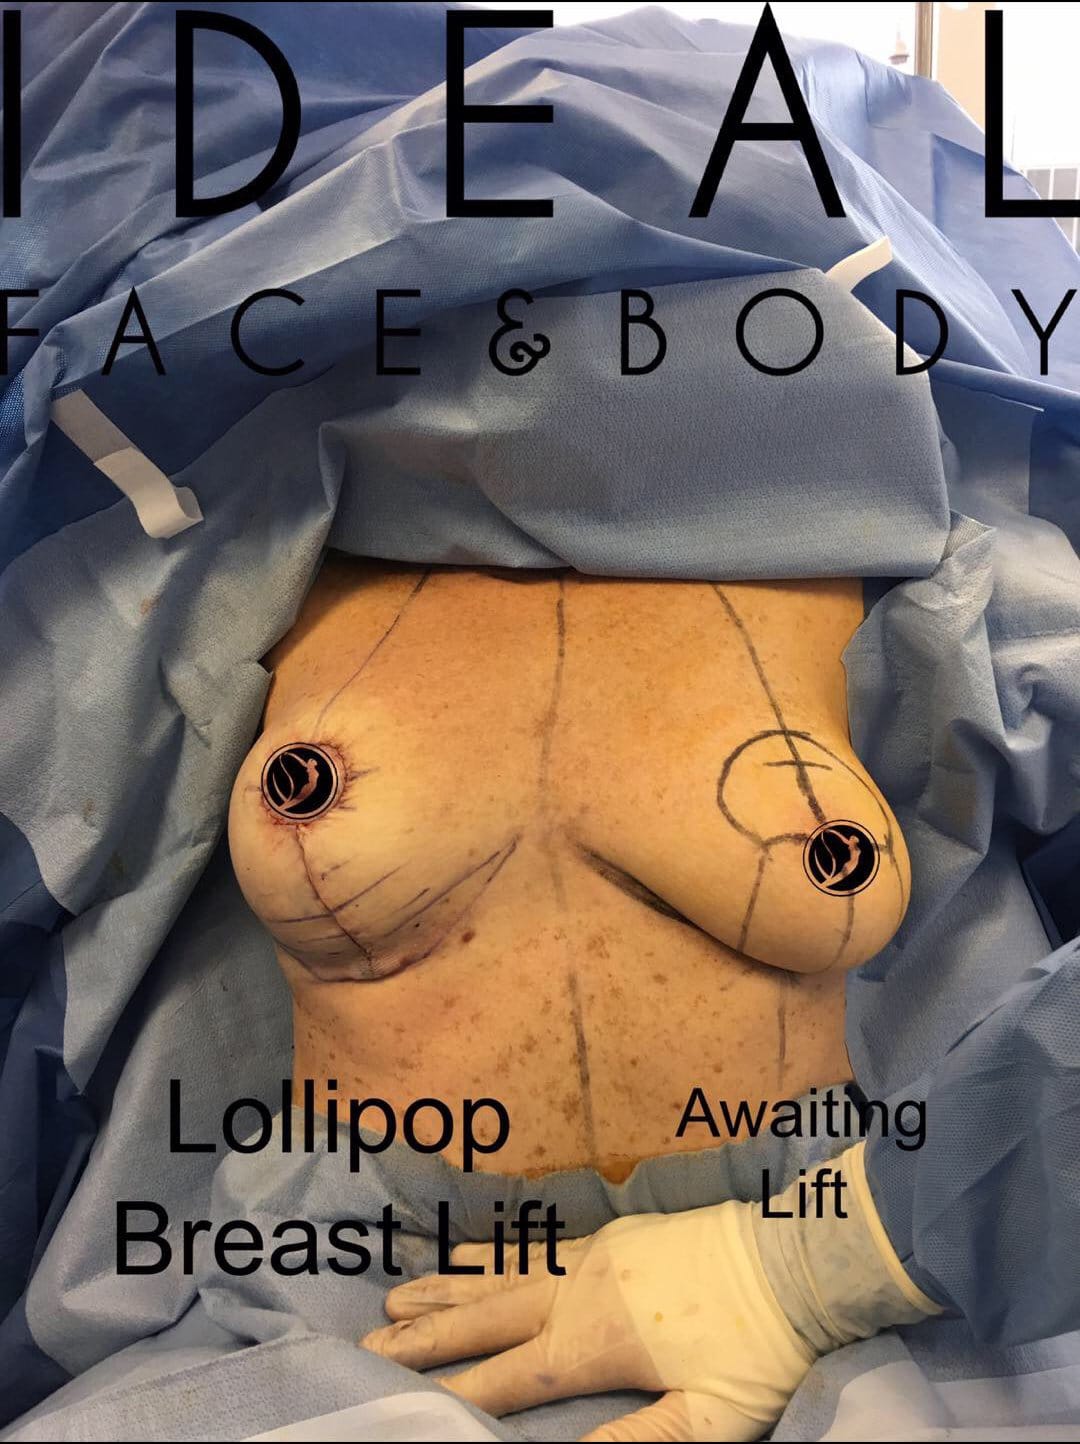 Showcase on breast lift page